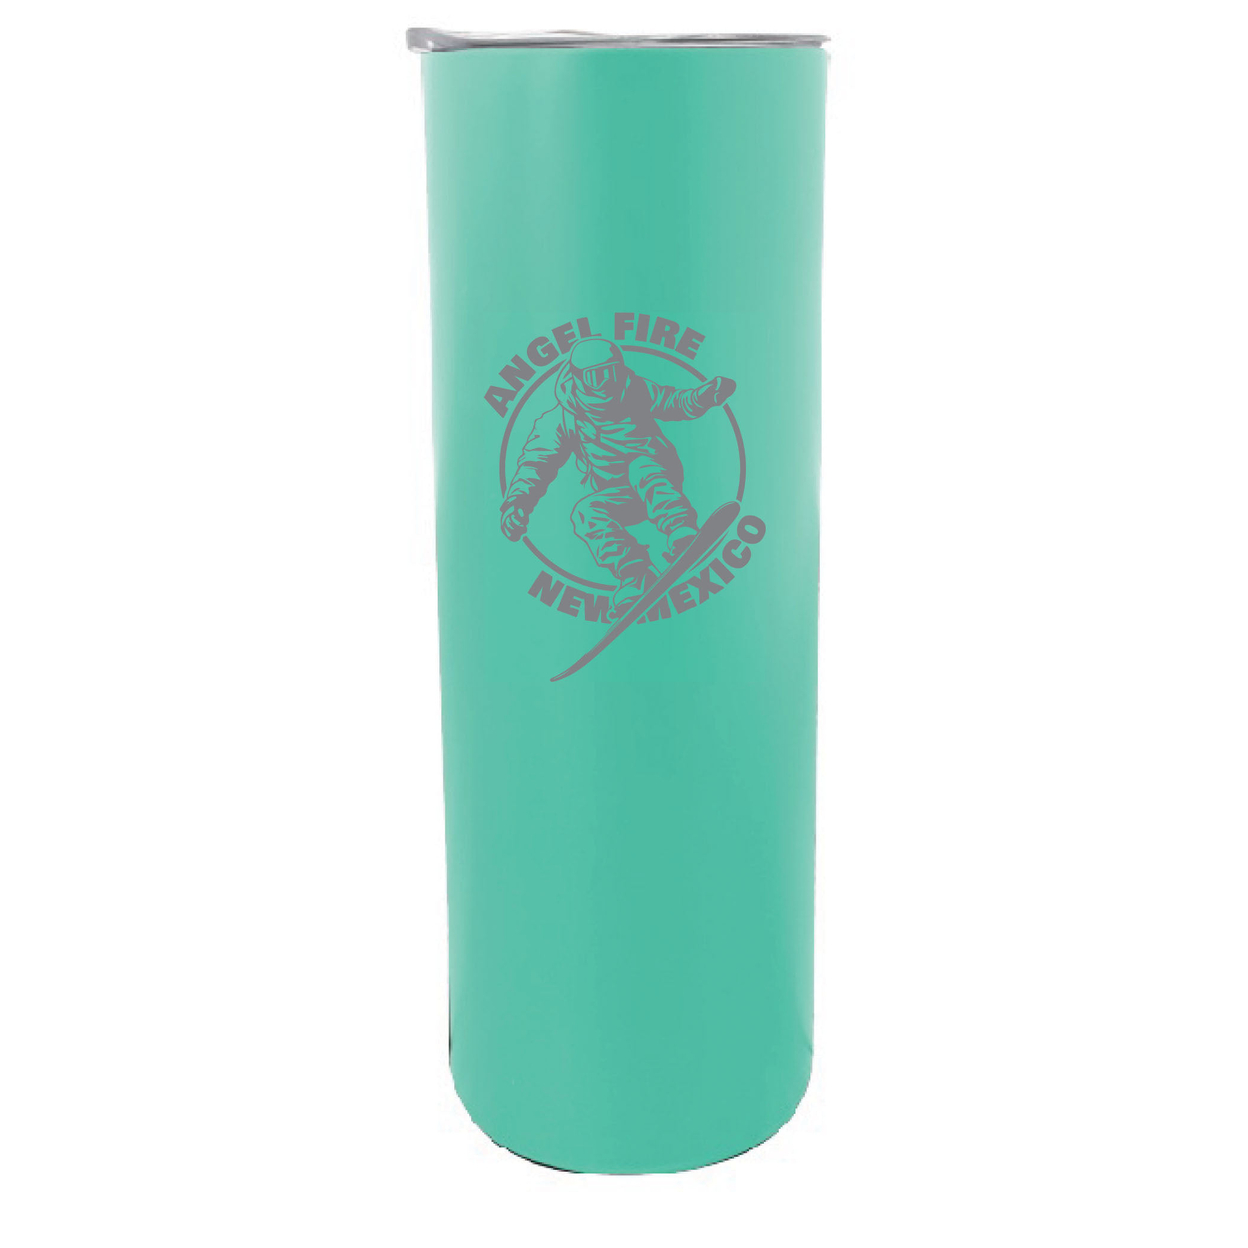 Angel Fire New Mexico Souvenir 20 Oz Engraved Insulated Stainless Steel Skinny Tumbler - Seafoam,,Single Unit